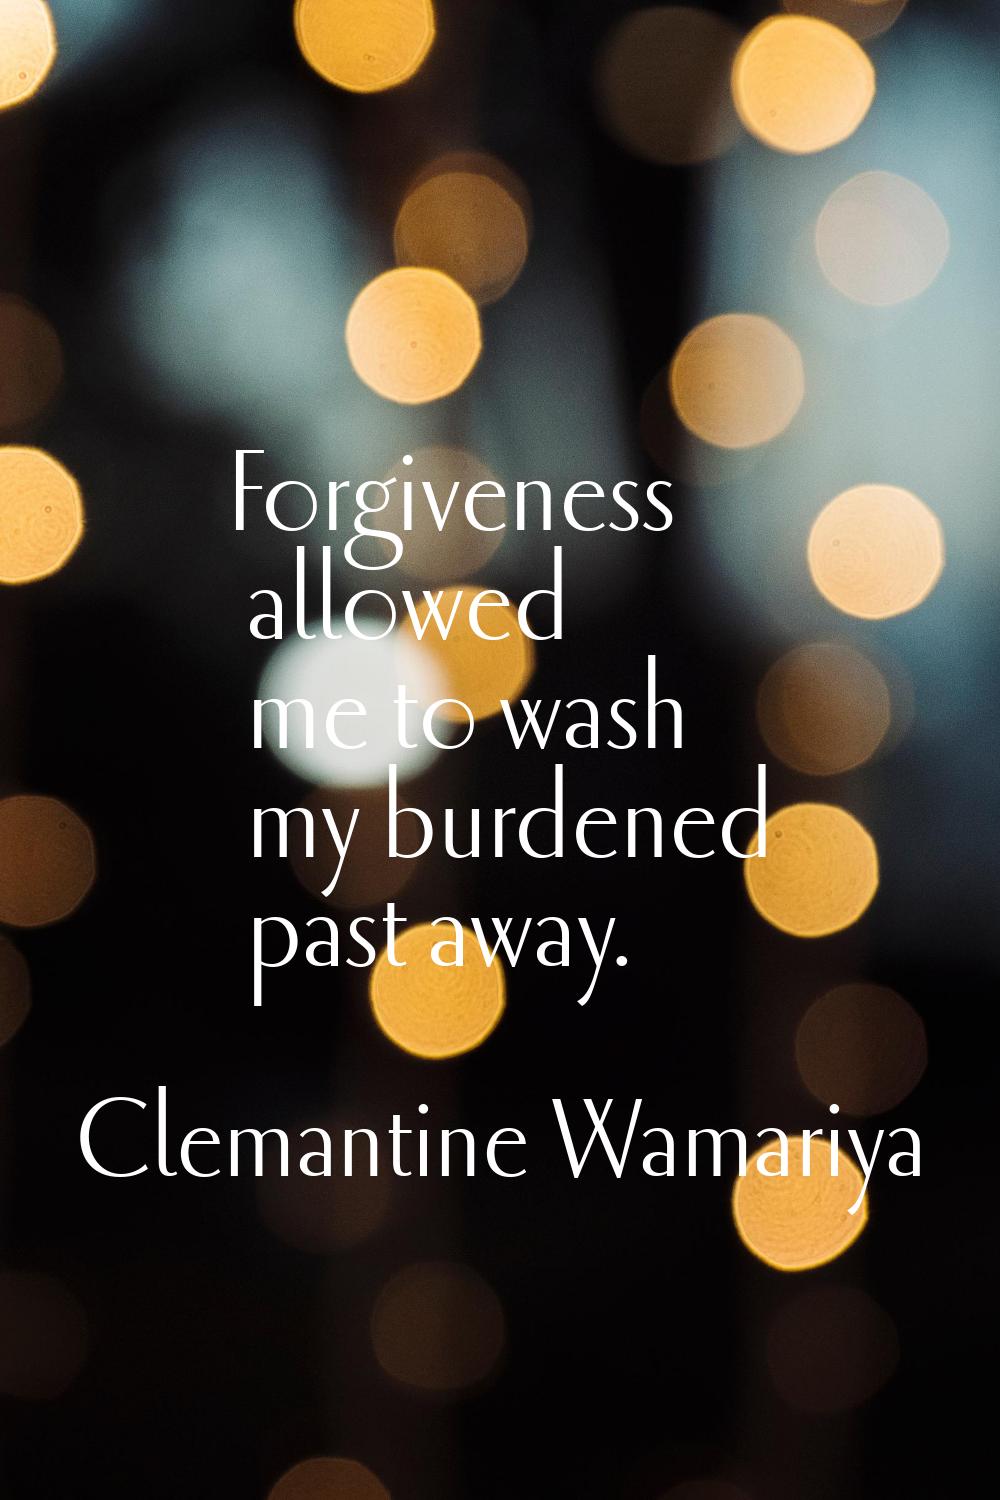 Forgiveness allowed me to wash my burdened past away.